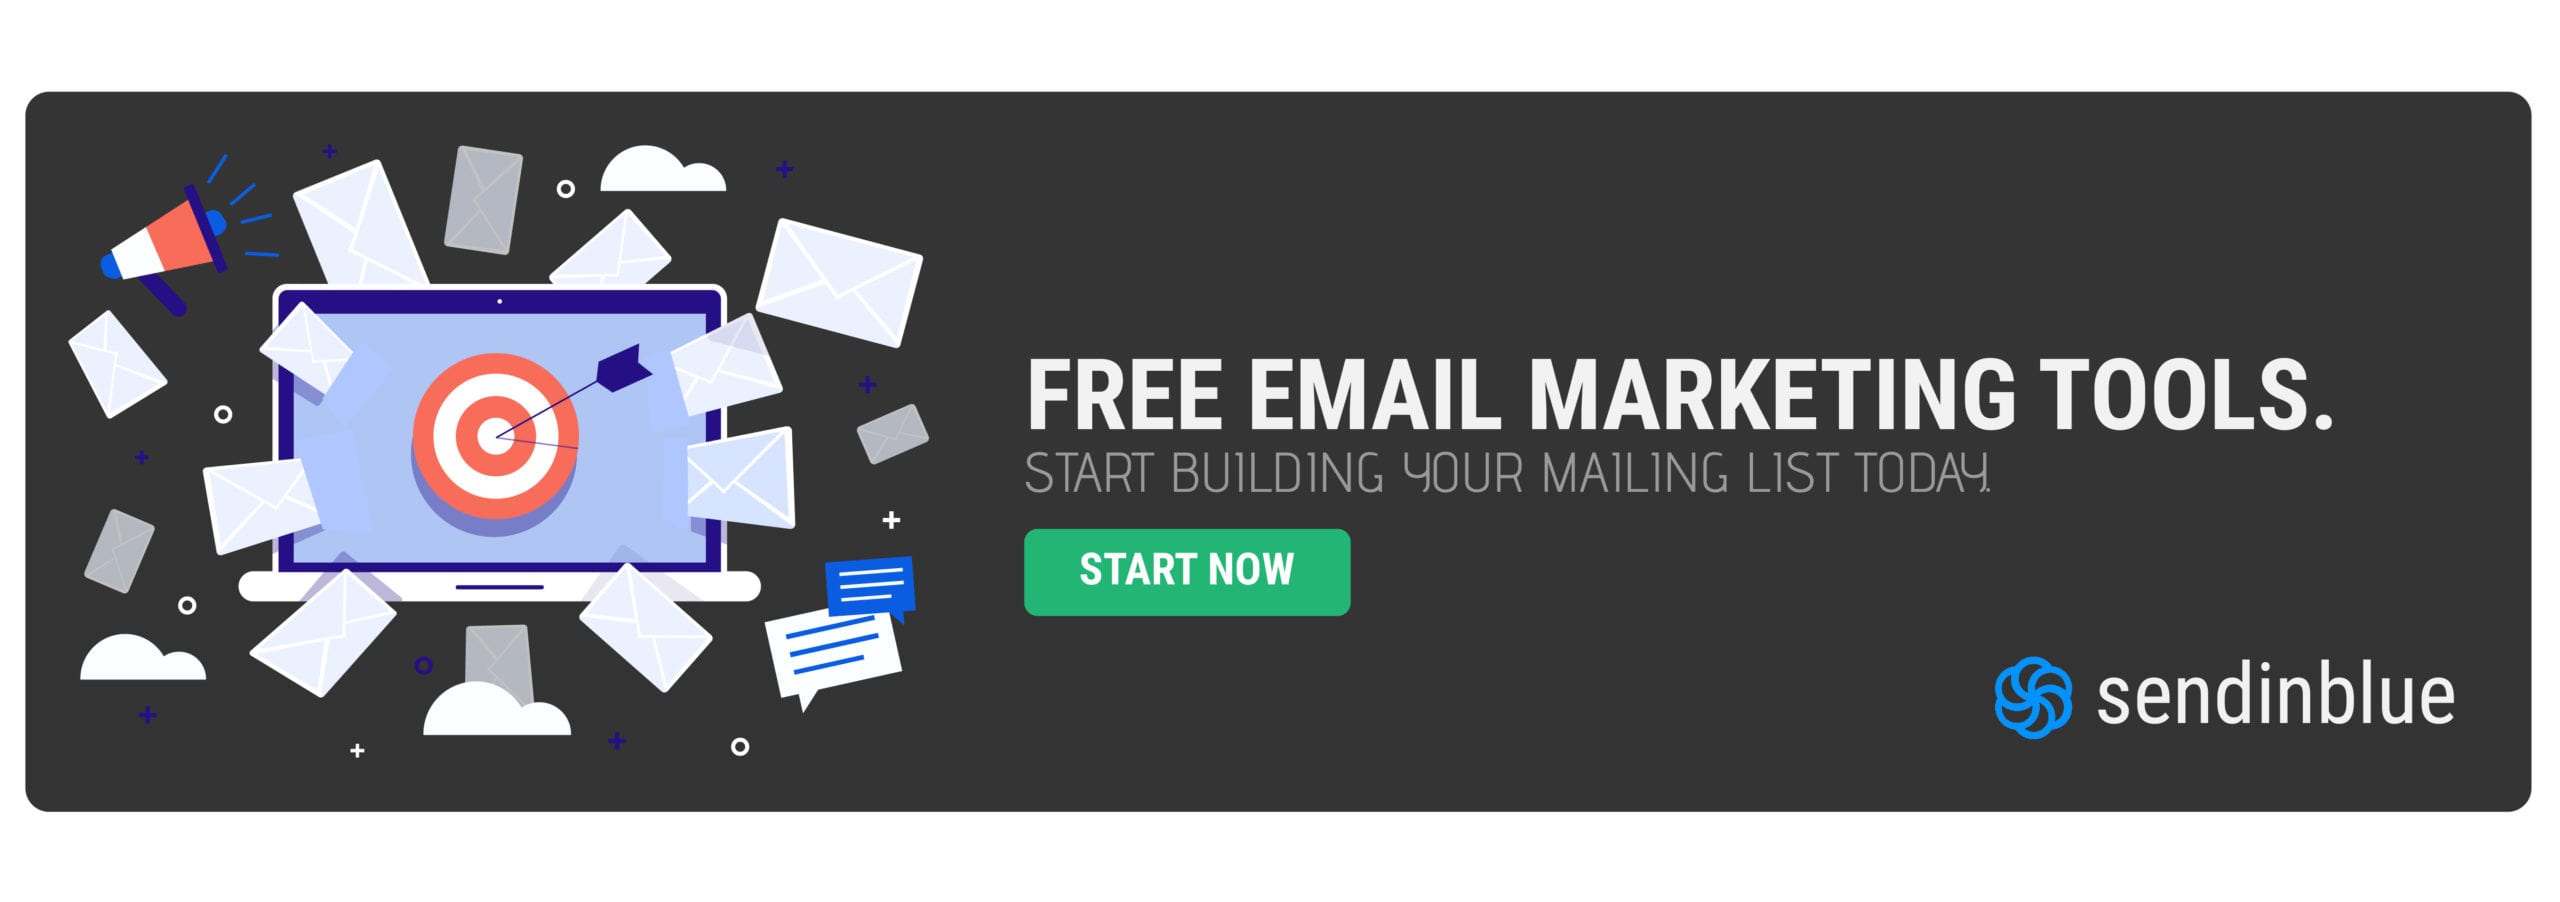 Email Marketing Tools Banner.